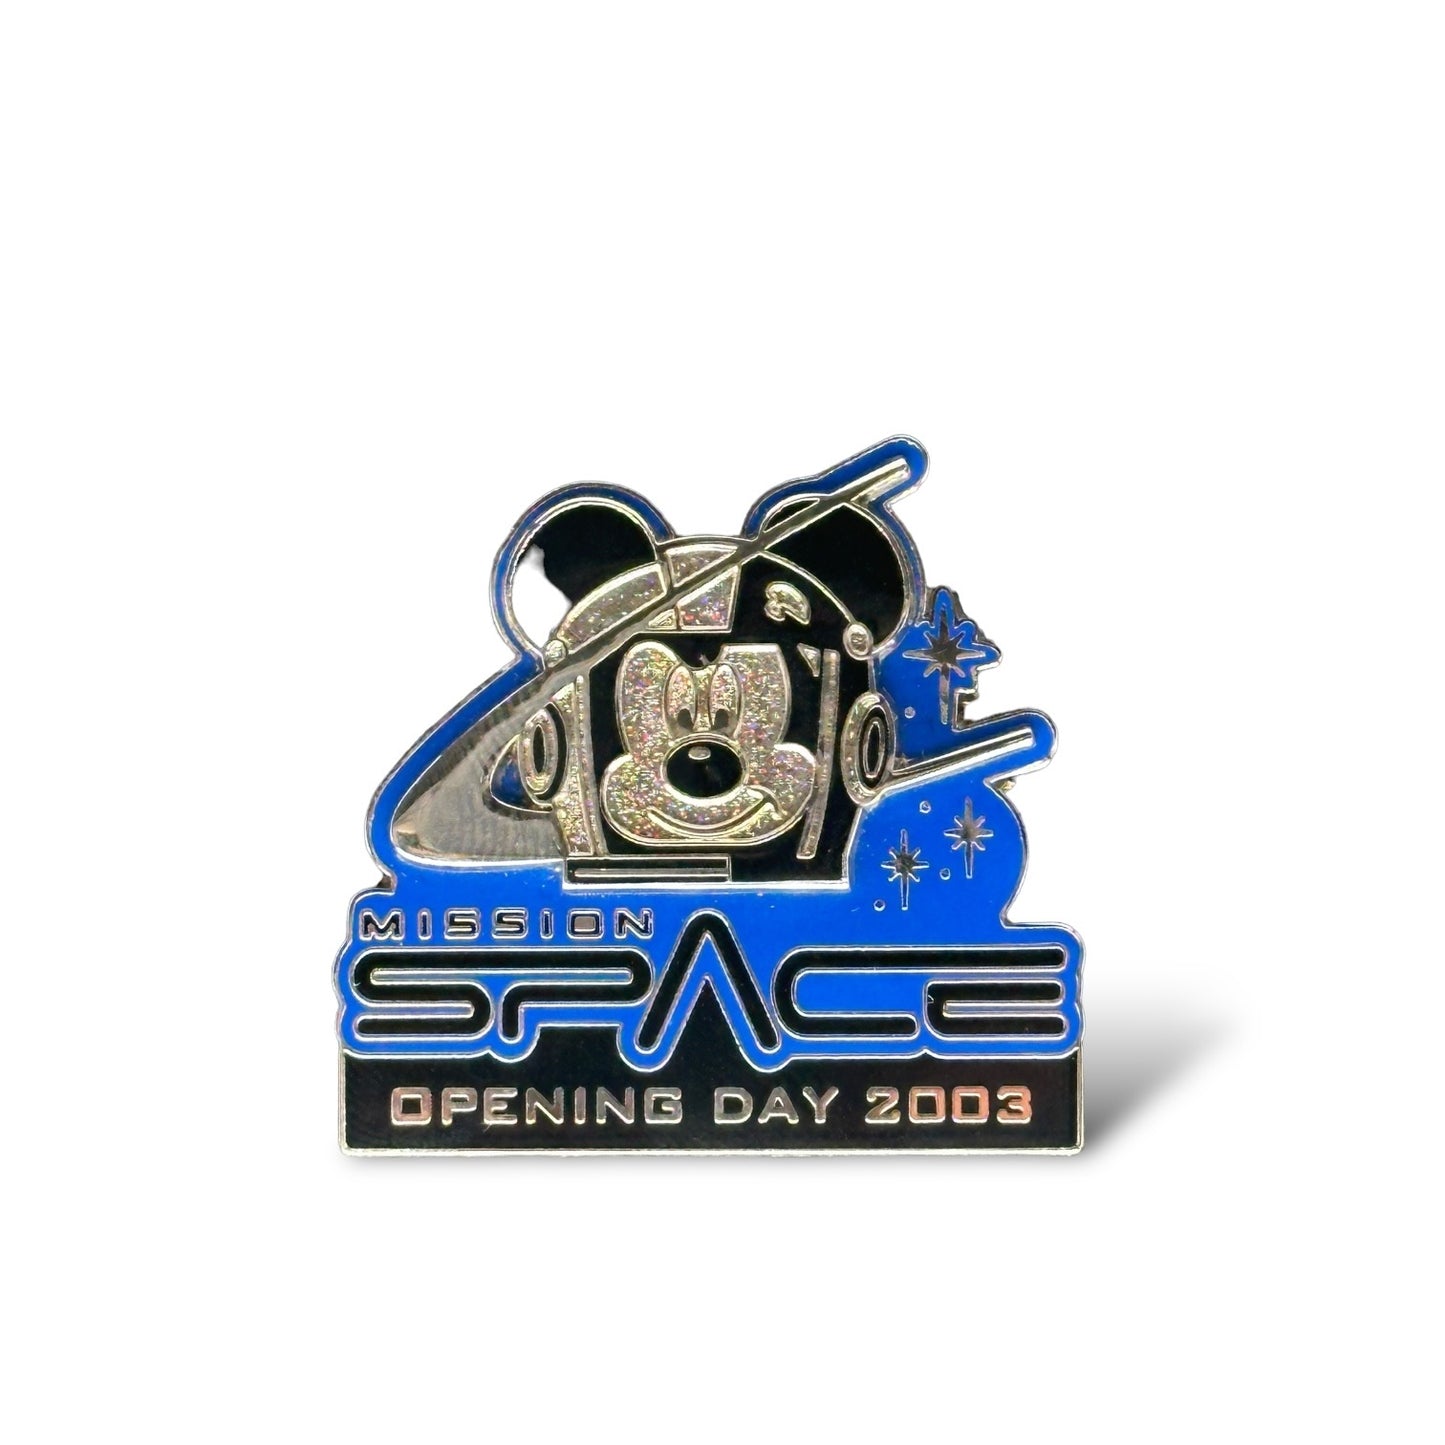 WDW Mickey Mouse Mission Space Opening Day 2003 Pin